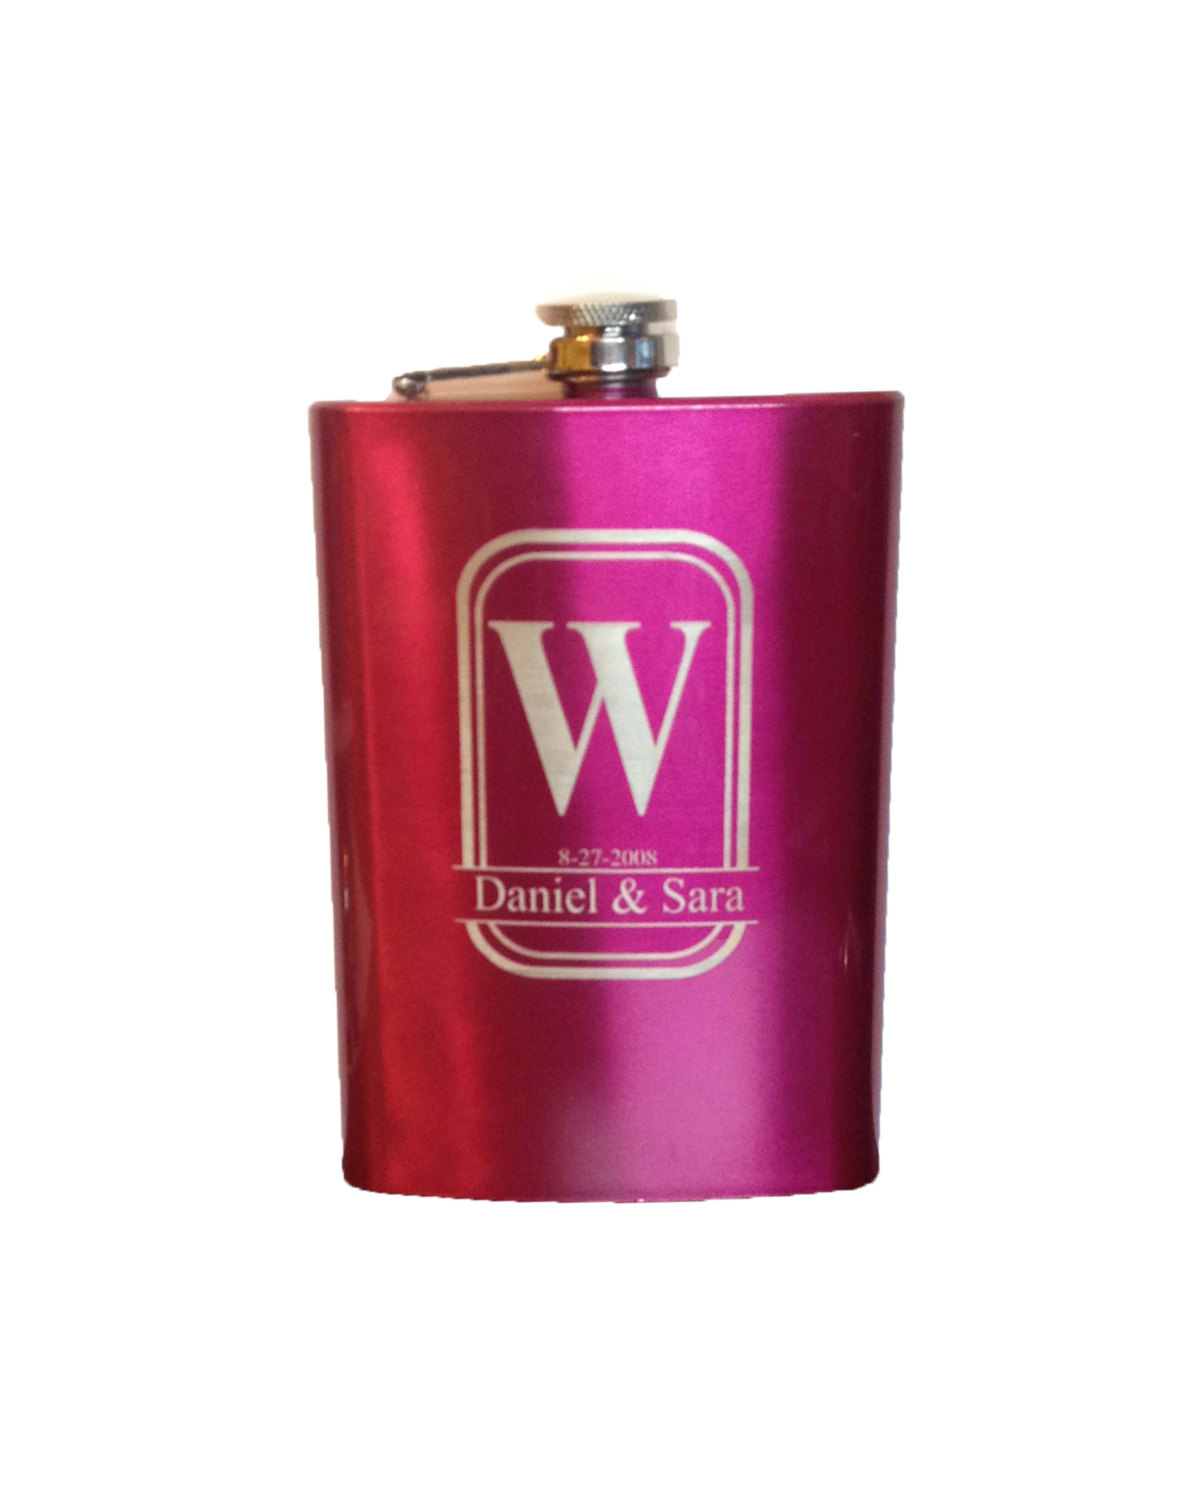 15 8 Oz Etched Pink Engraved Flask Stainless Steel High Gloss Engraved Personalized Groomsman Gift Bridesmaid Gift Wedding Favor